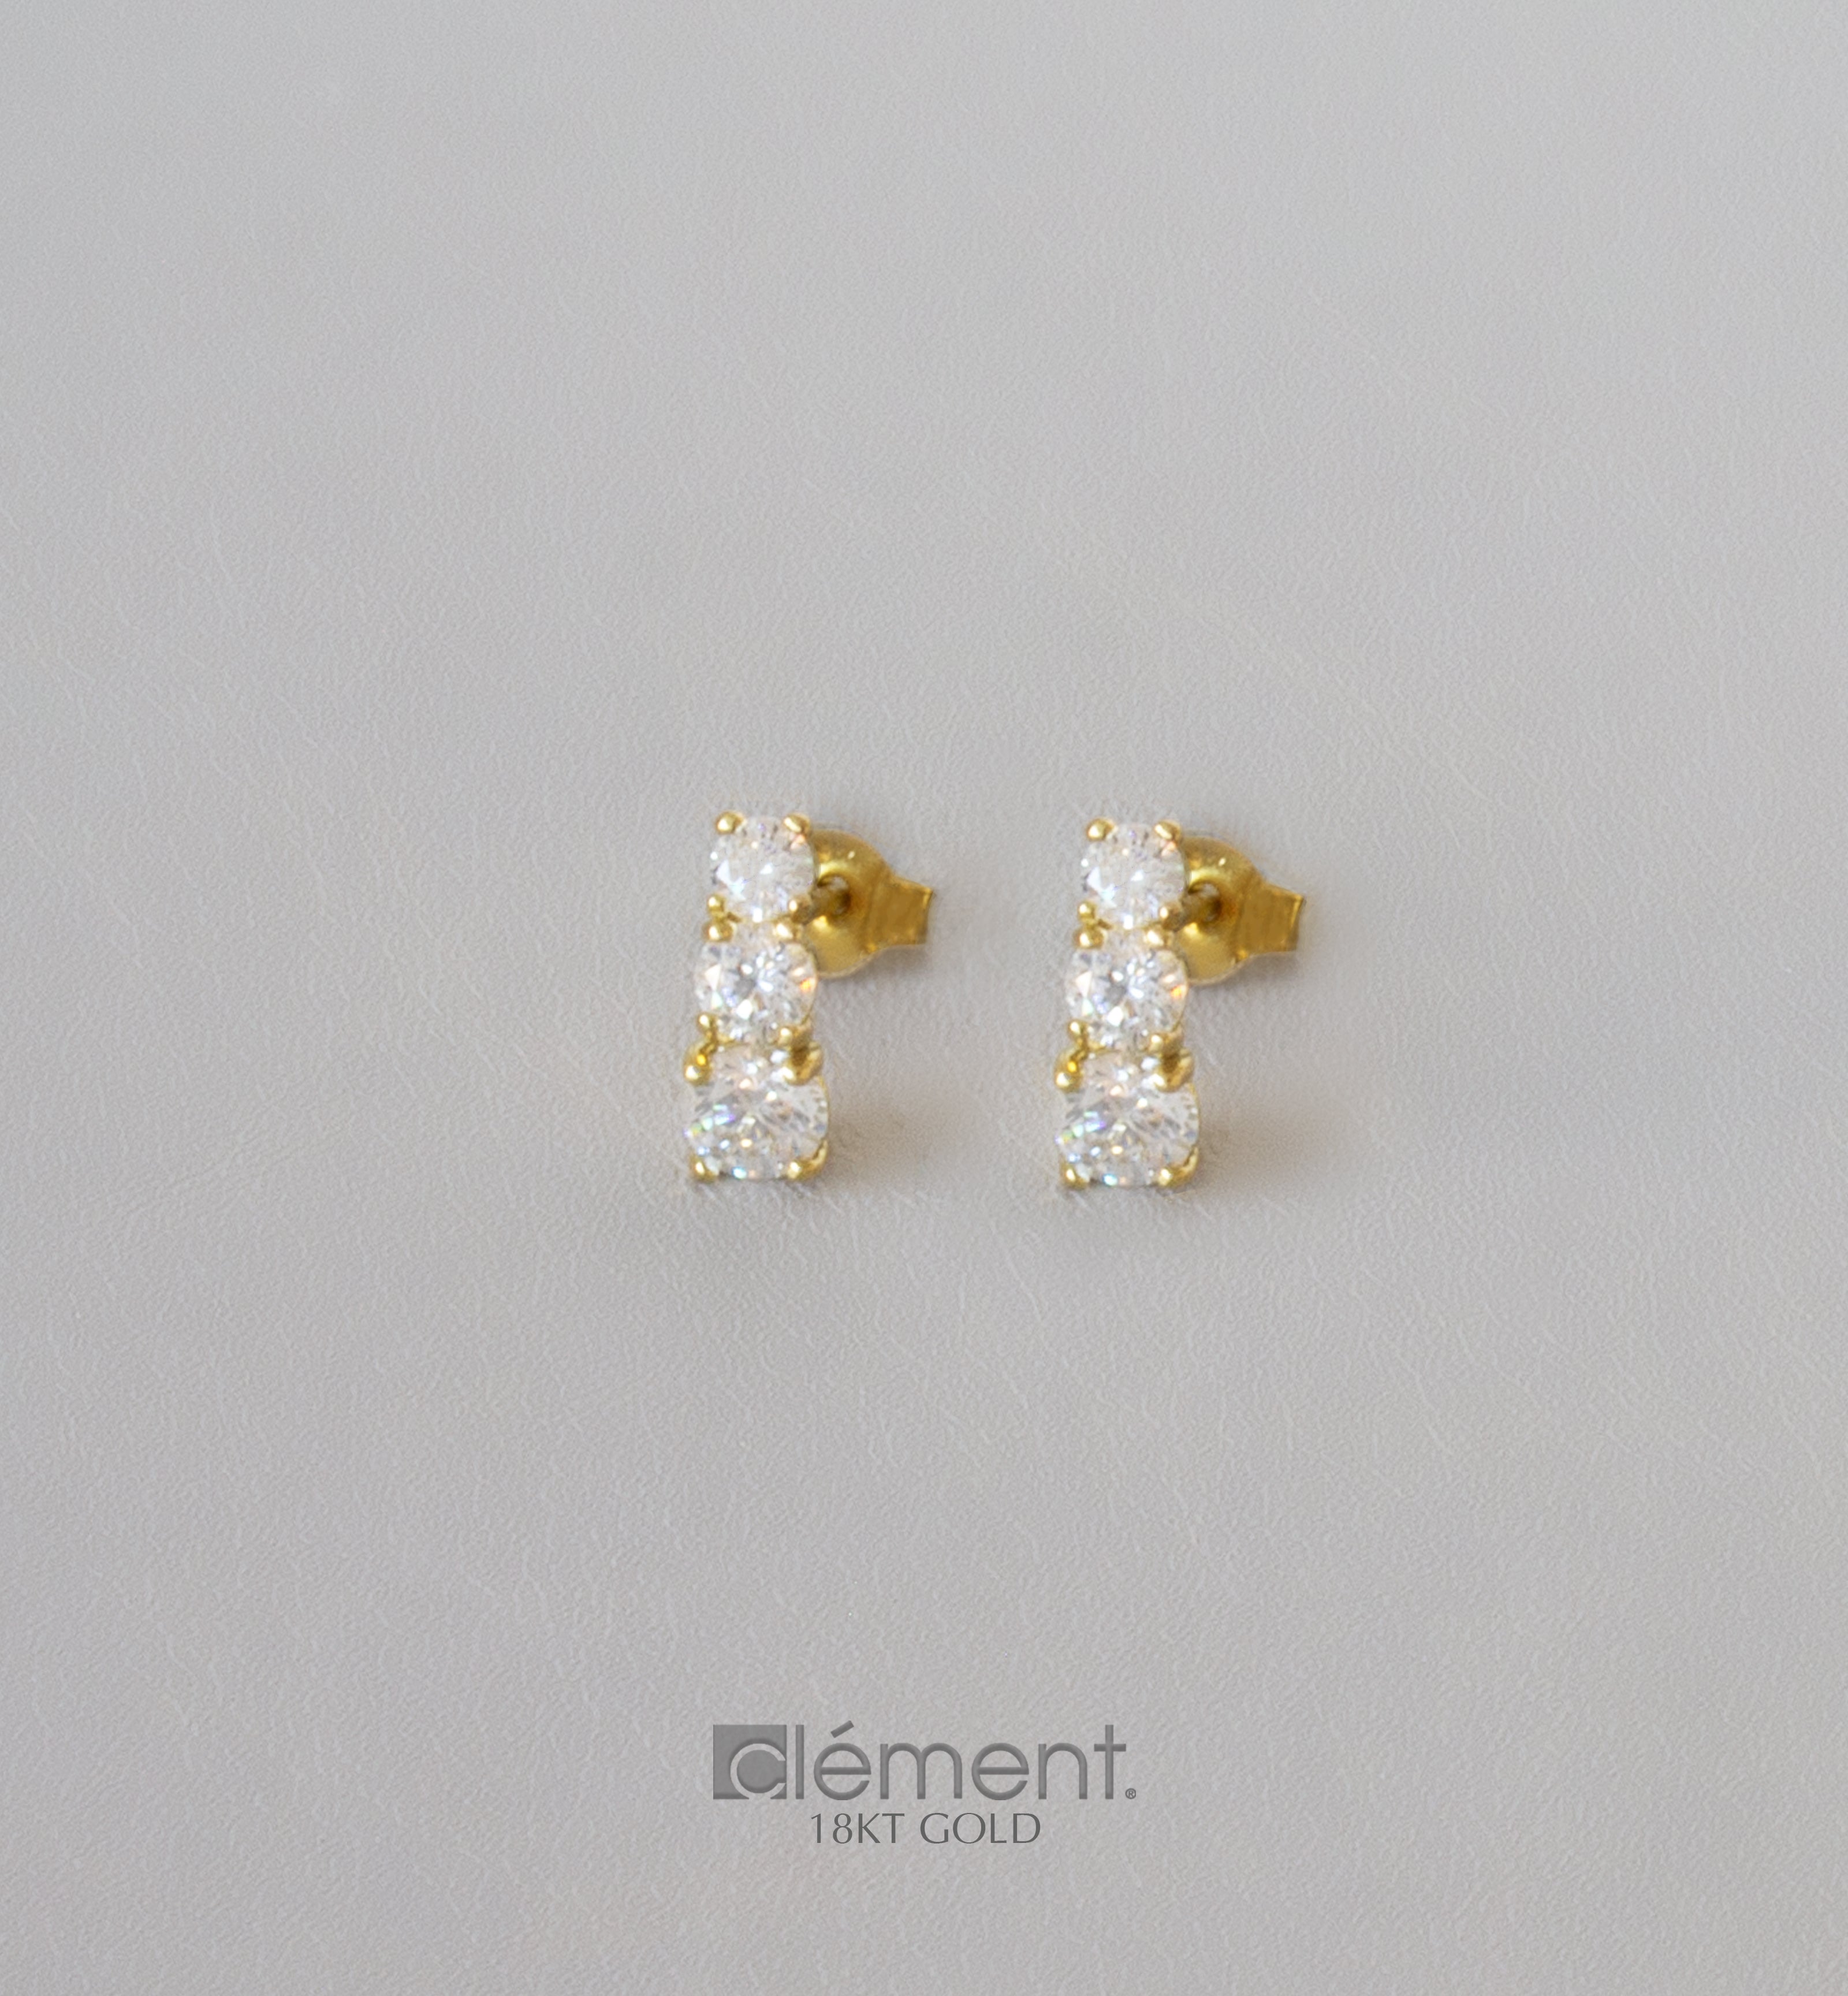 18ct Gold Trilogy Earrings with CZ Stones